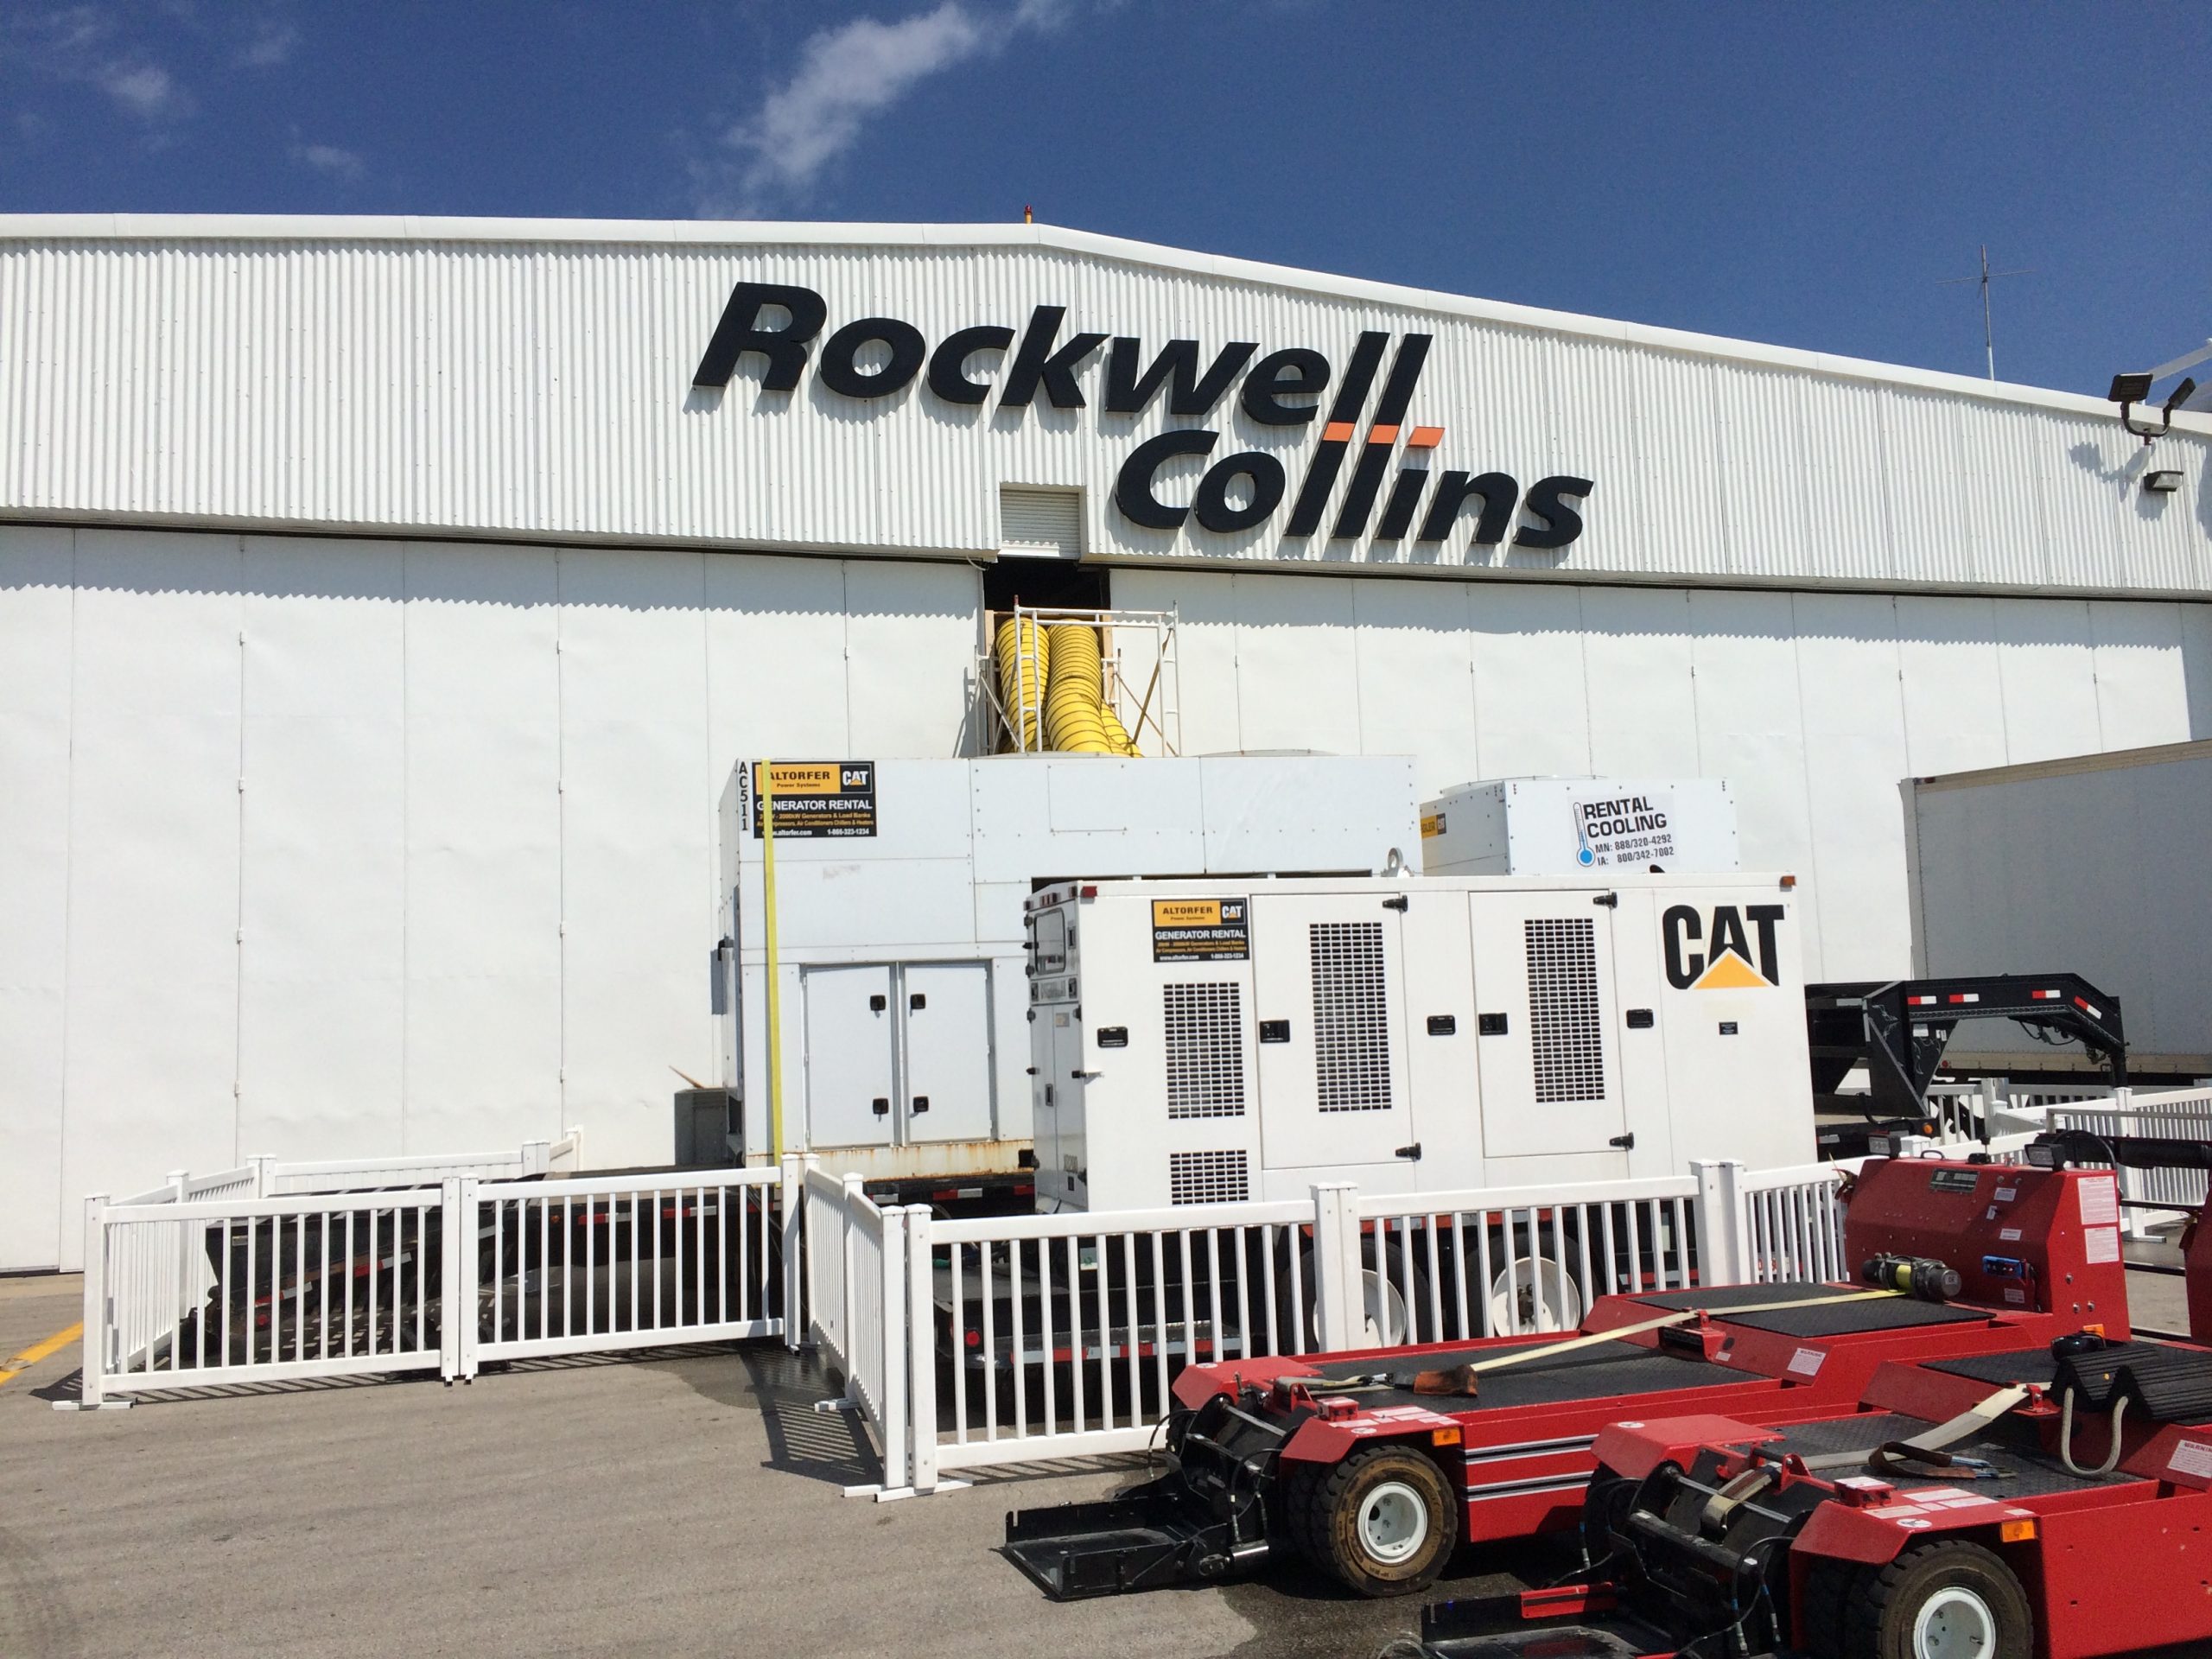 Air Conditioning of the Rockwell Collins airplane hangar at the Eastern Iowa Airport